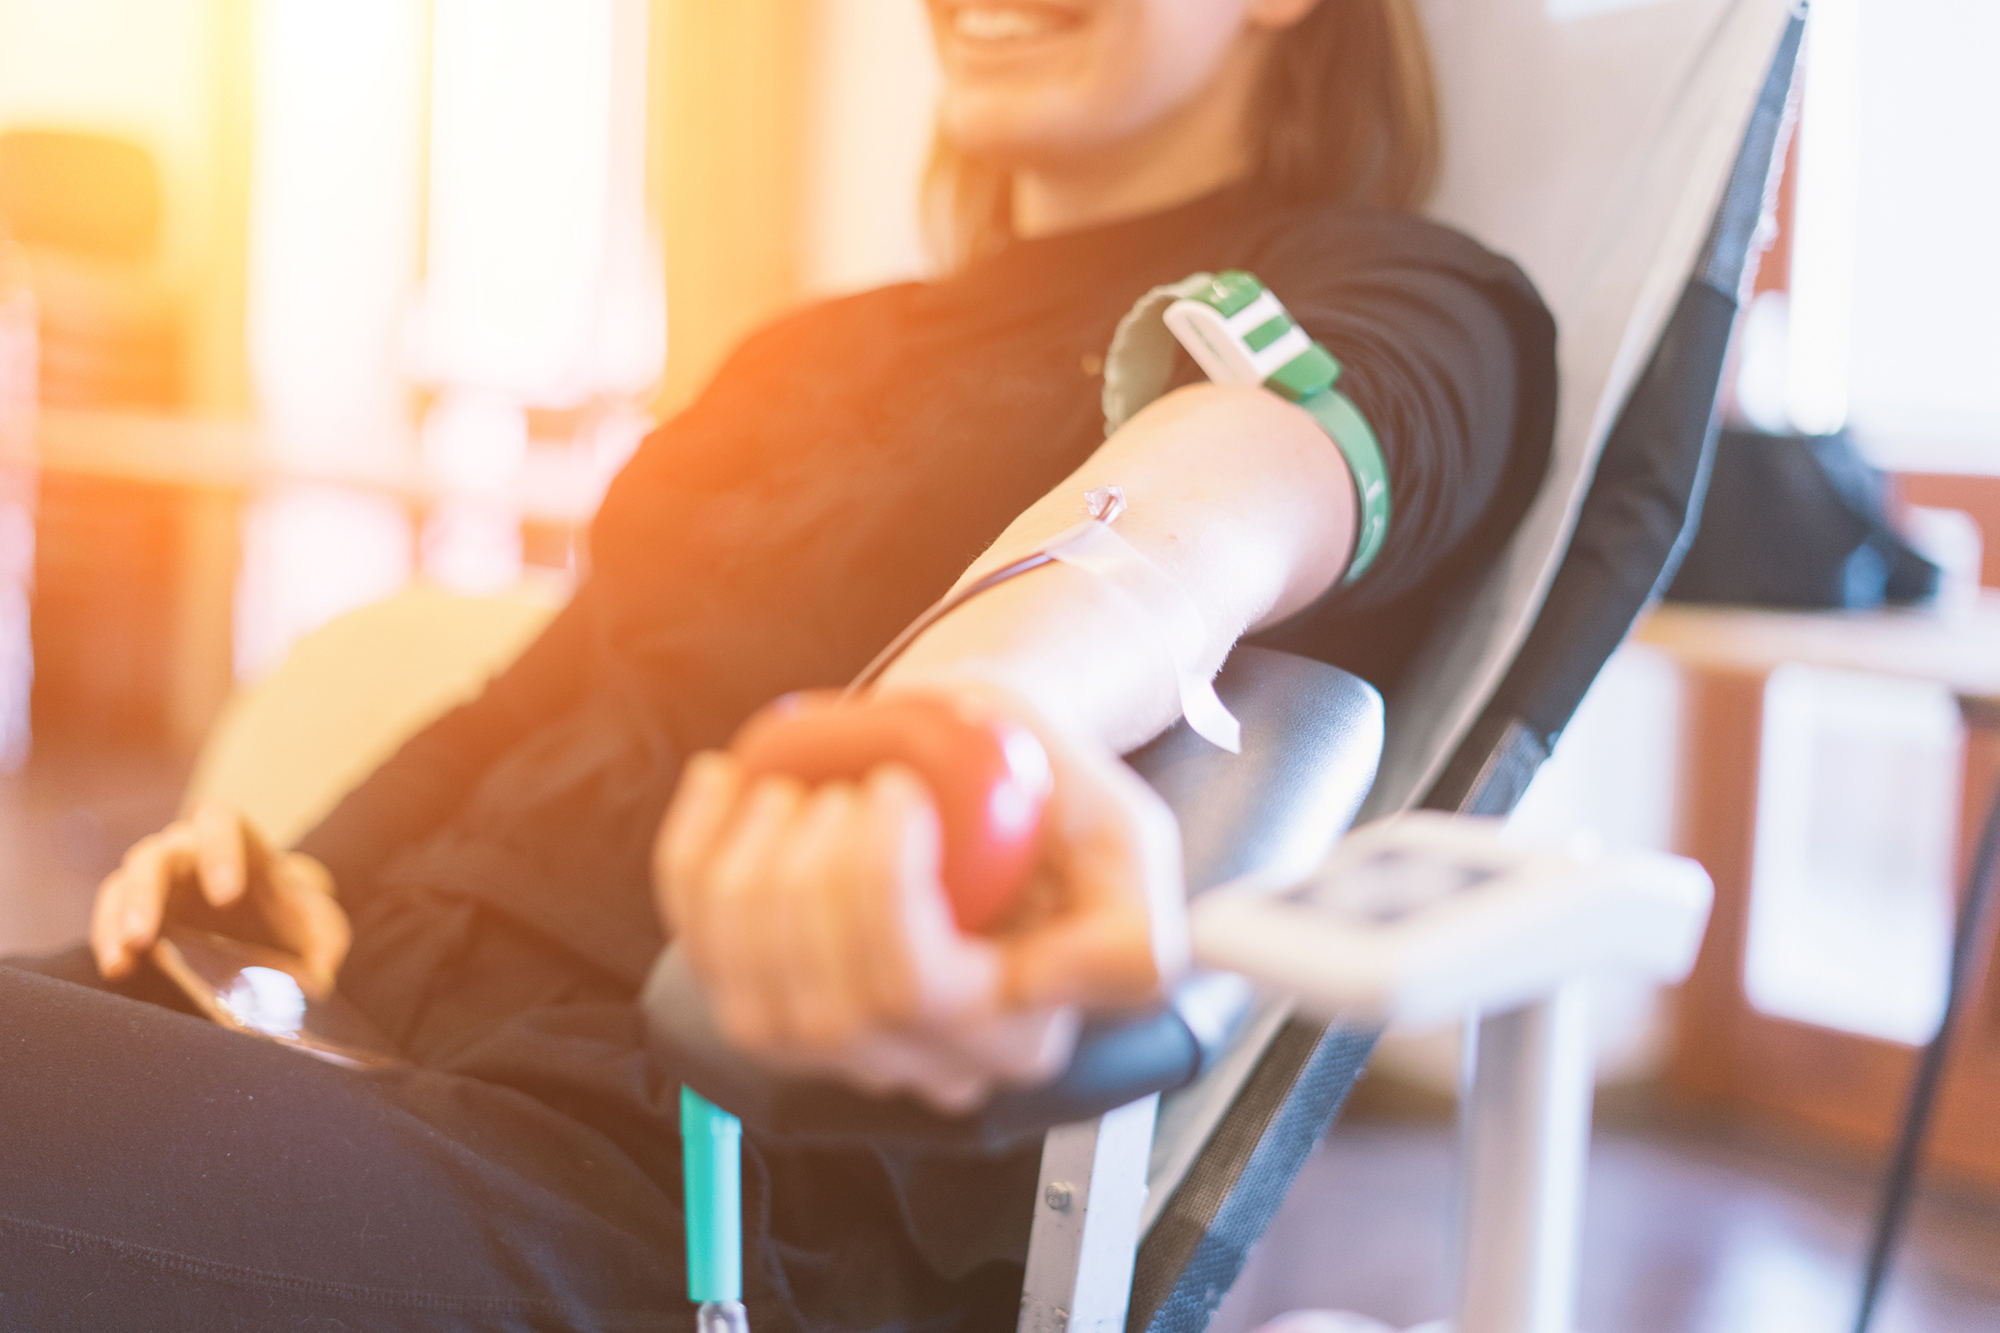 5 Shocking Health Benefits of Donating Blood You’ve Never Heard of